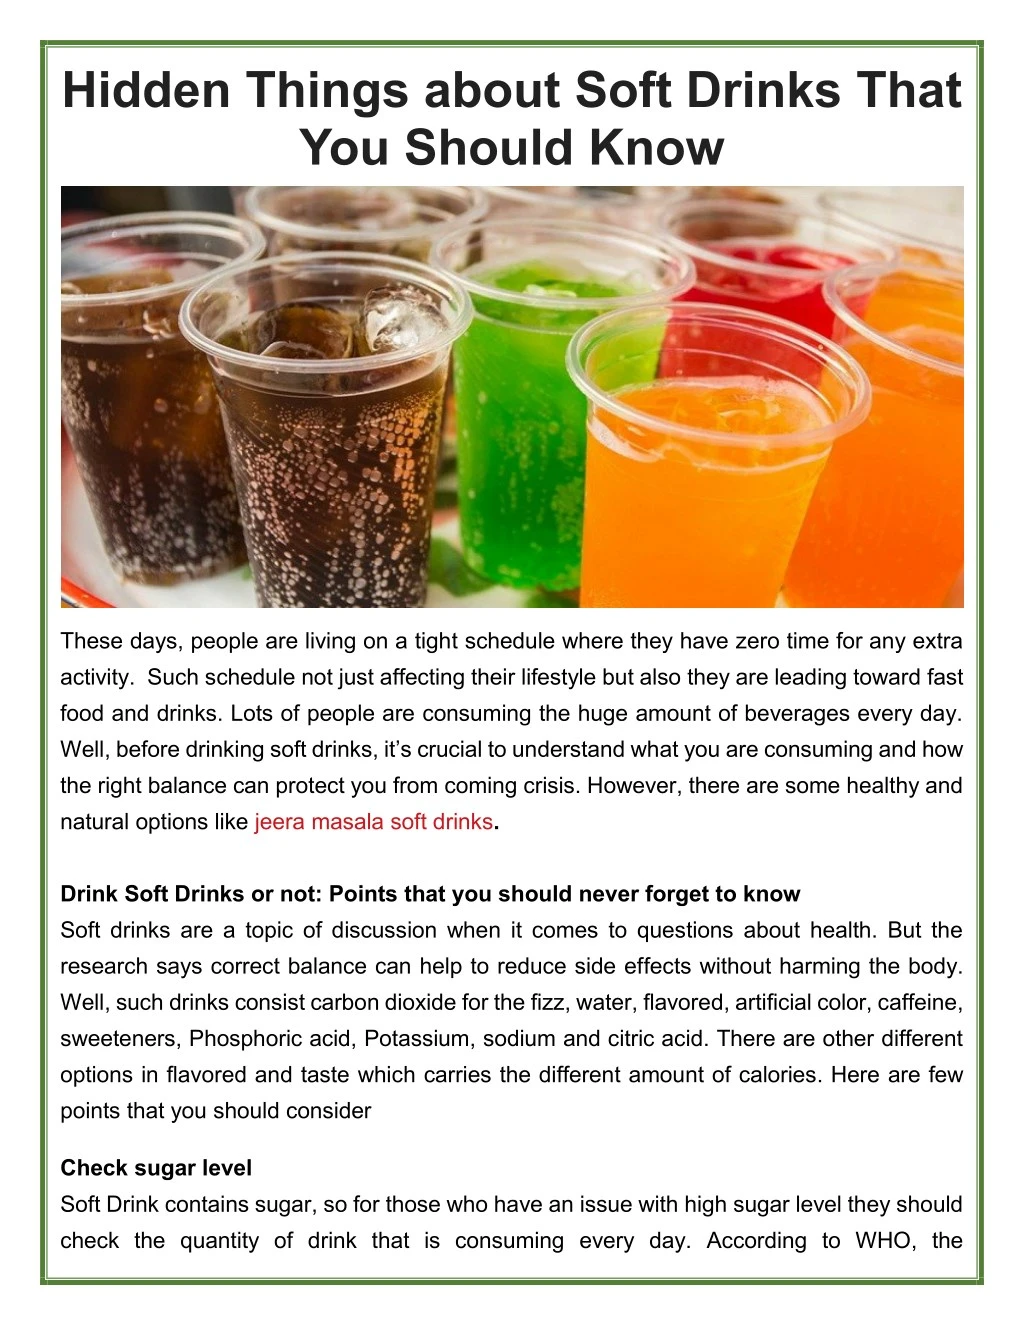 hidden things about soft drinks that you should